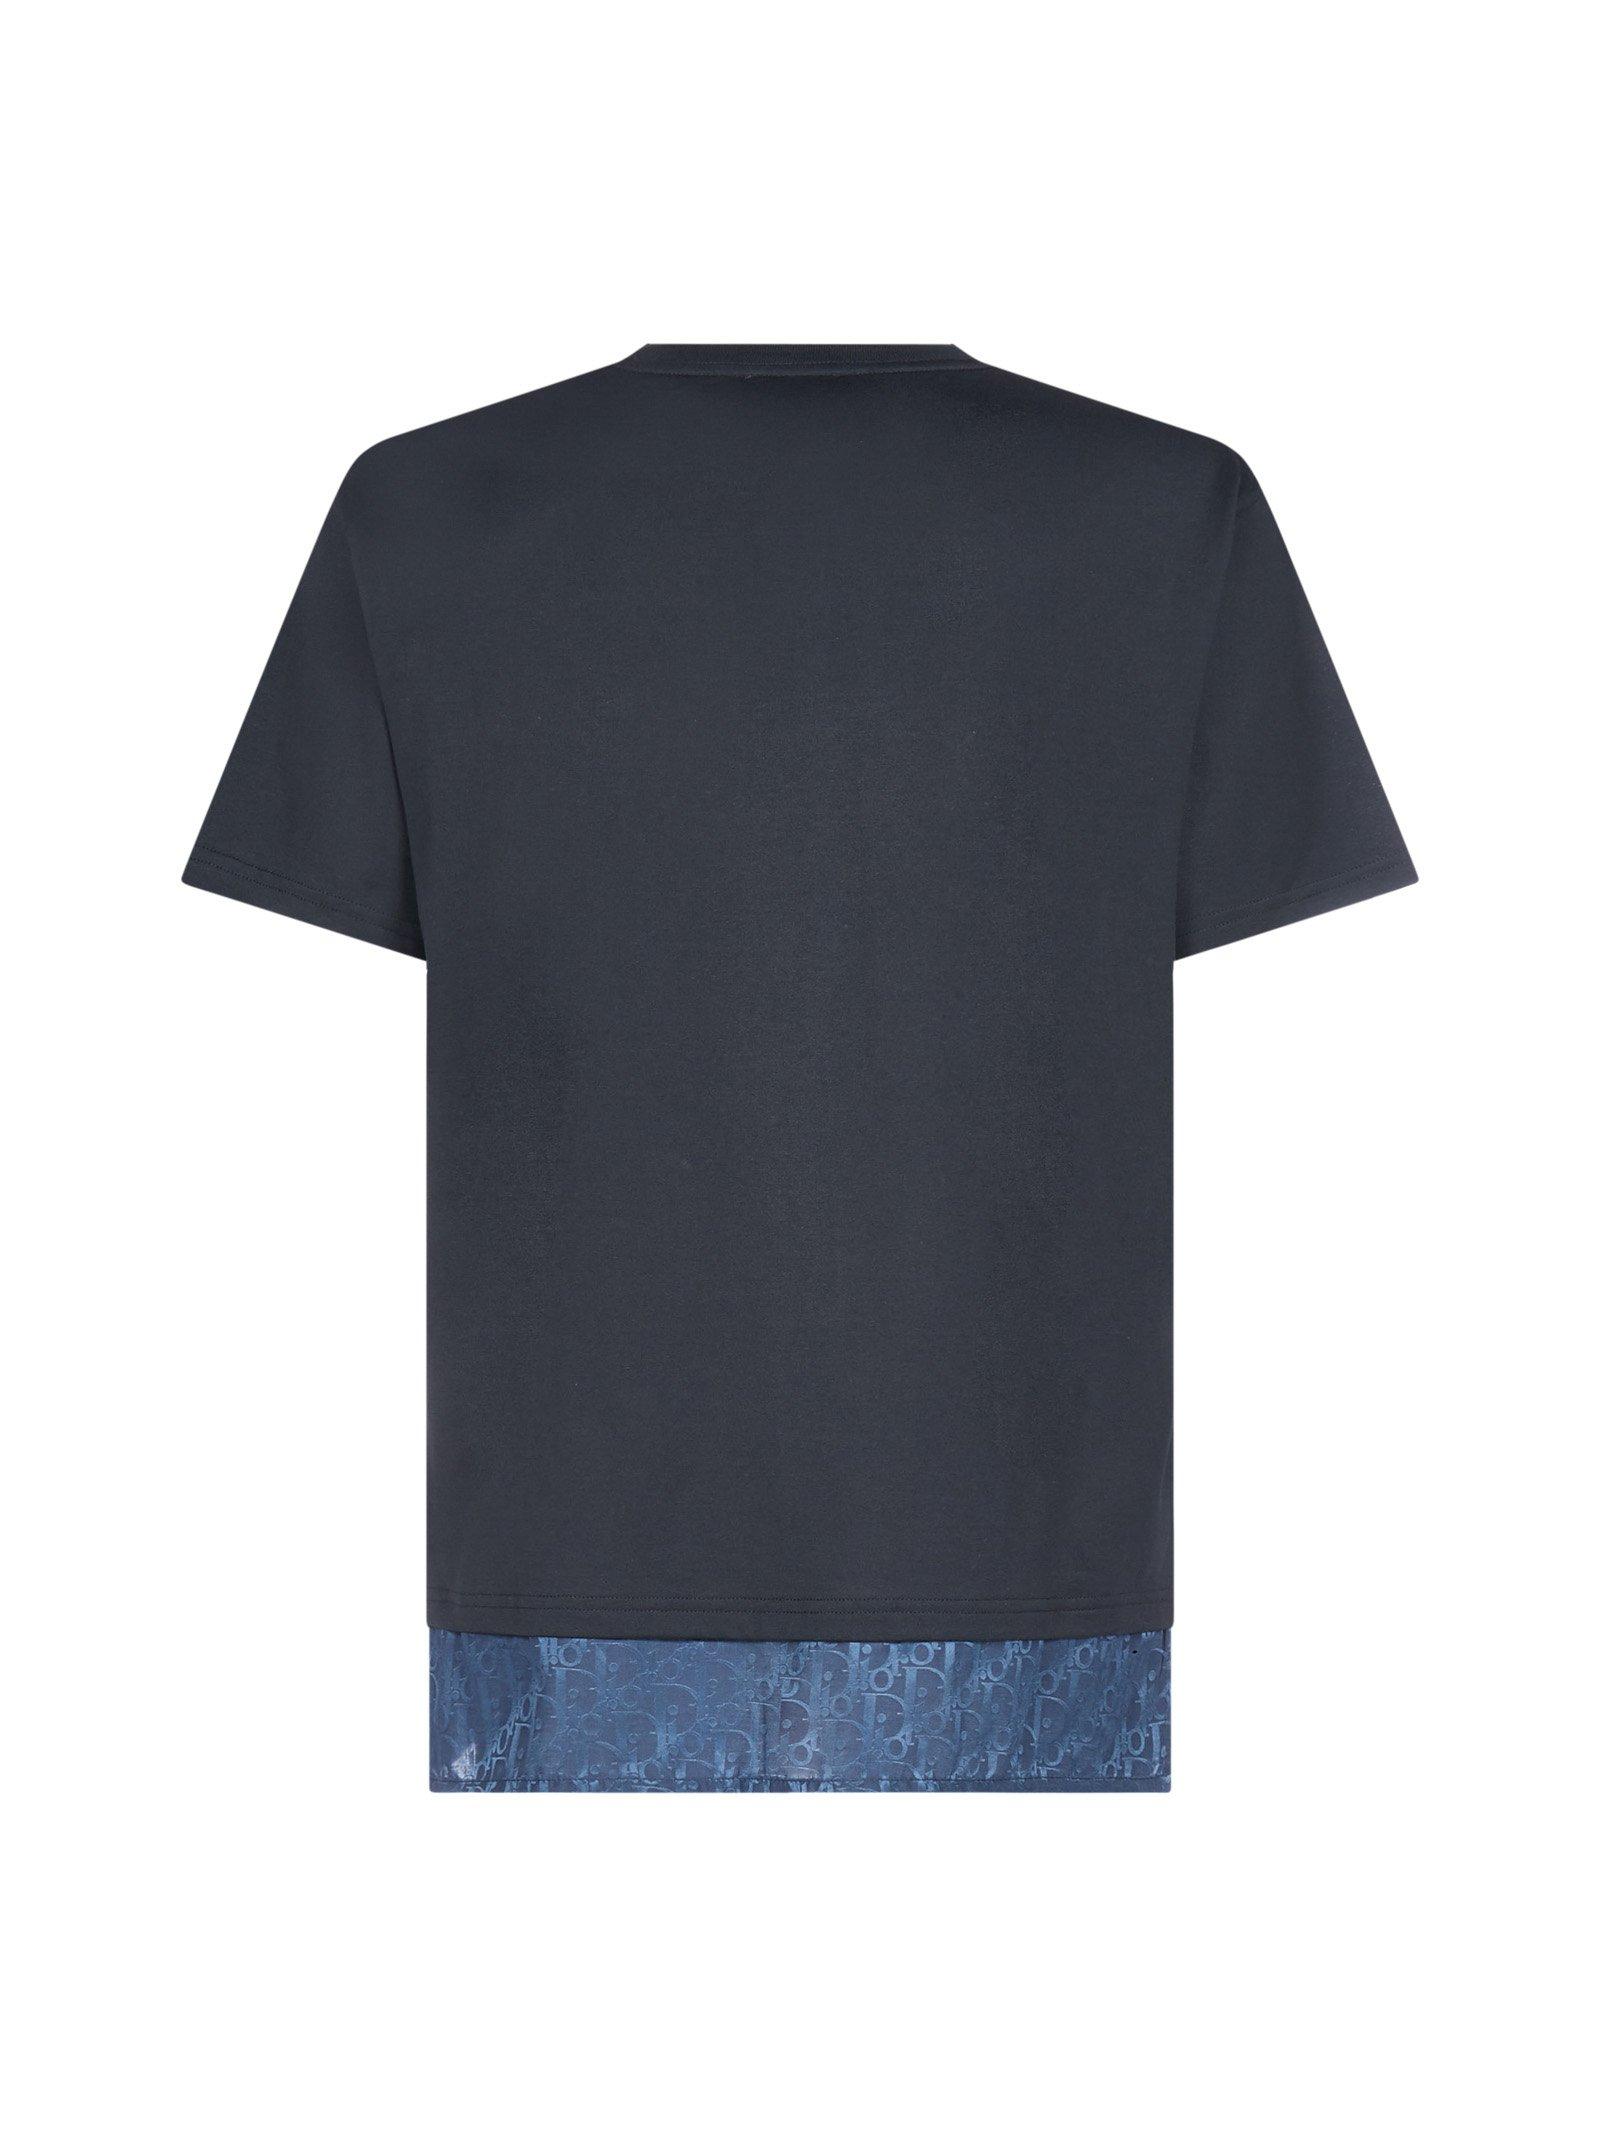 Dior Oblique TShirt Relaxed Fit Navy Blue Terry Cotton Jacquard  DIOR US